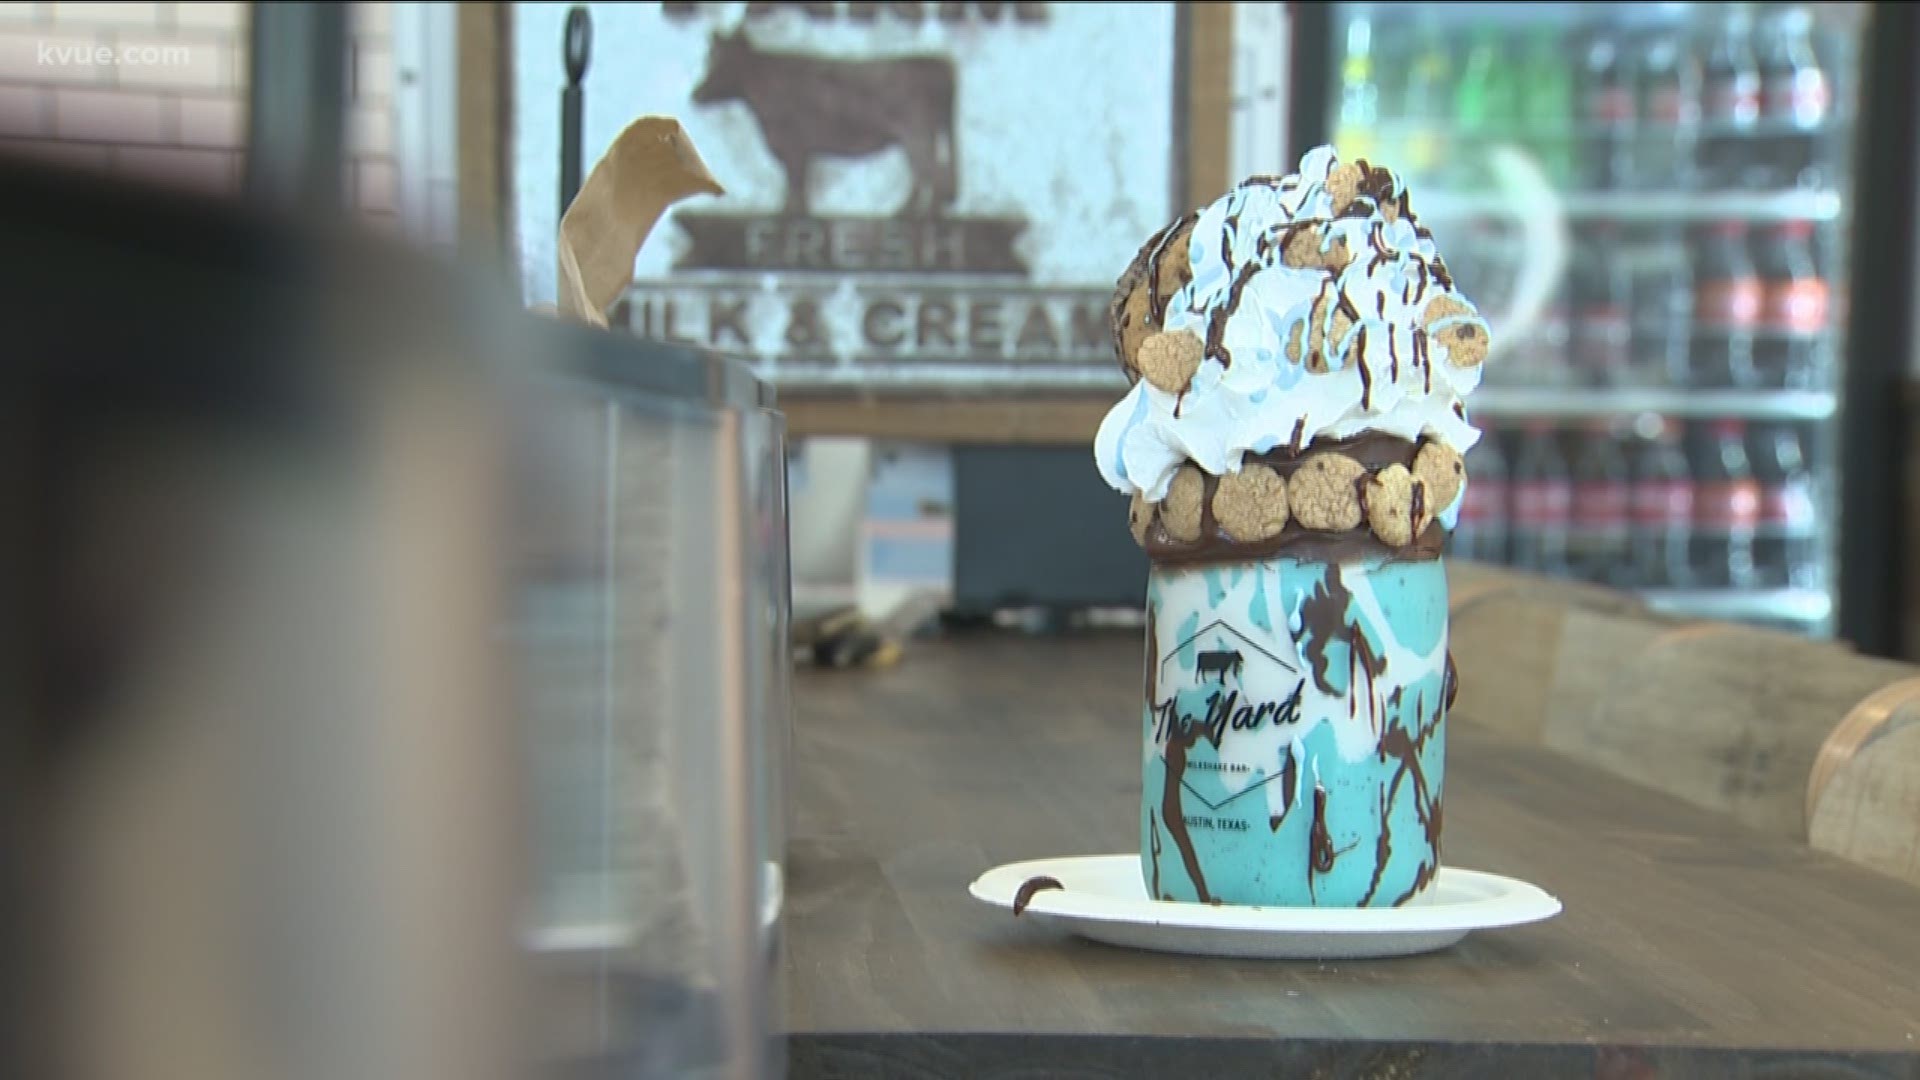 This Alabama-based milkshake bar known for its indulgent, over the top ice cream creations, opened its first Texas location in Austin earlier this spring!